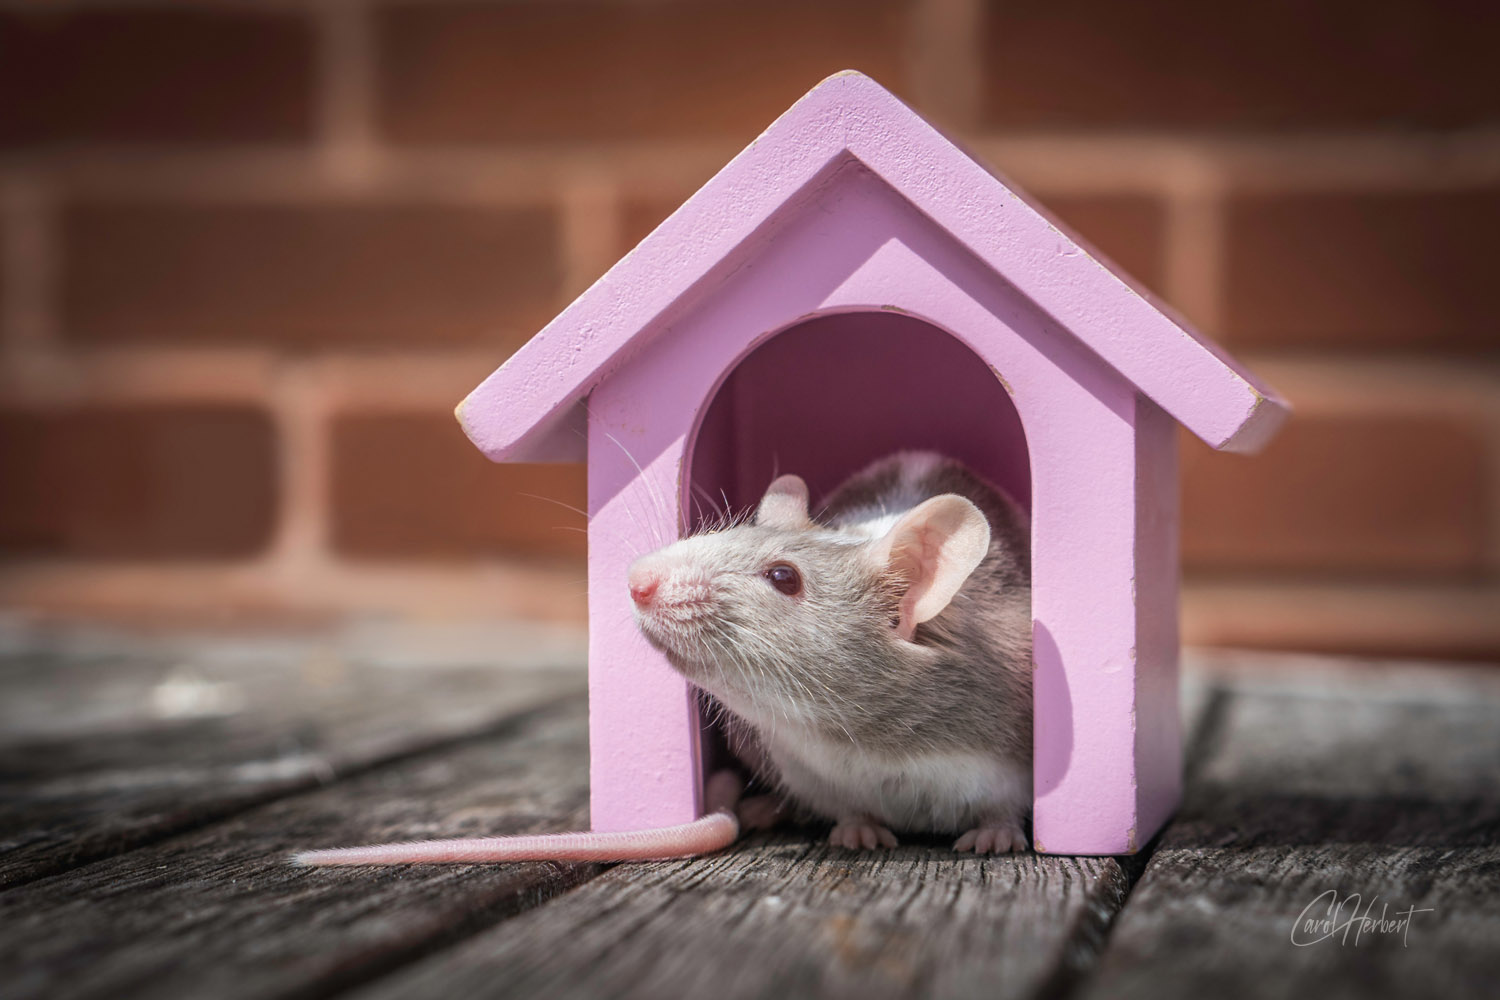 A grey and white fancy mouse in a pink toy dog house